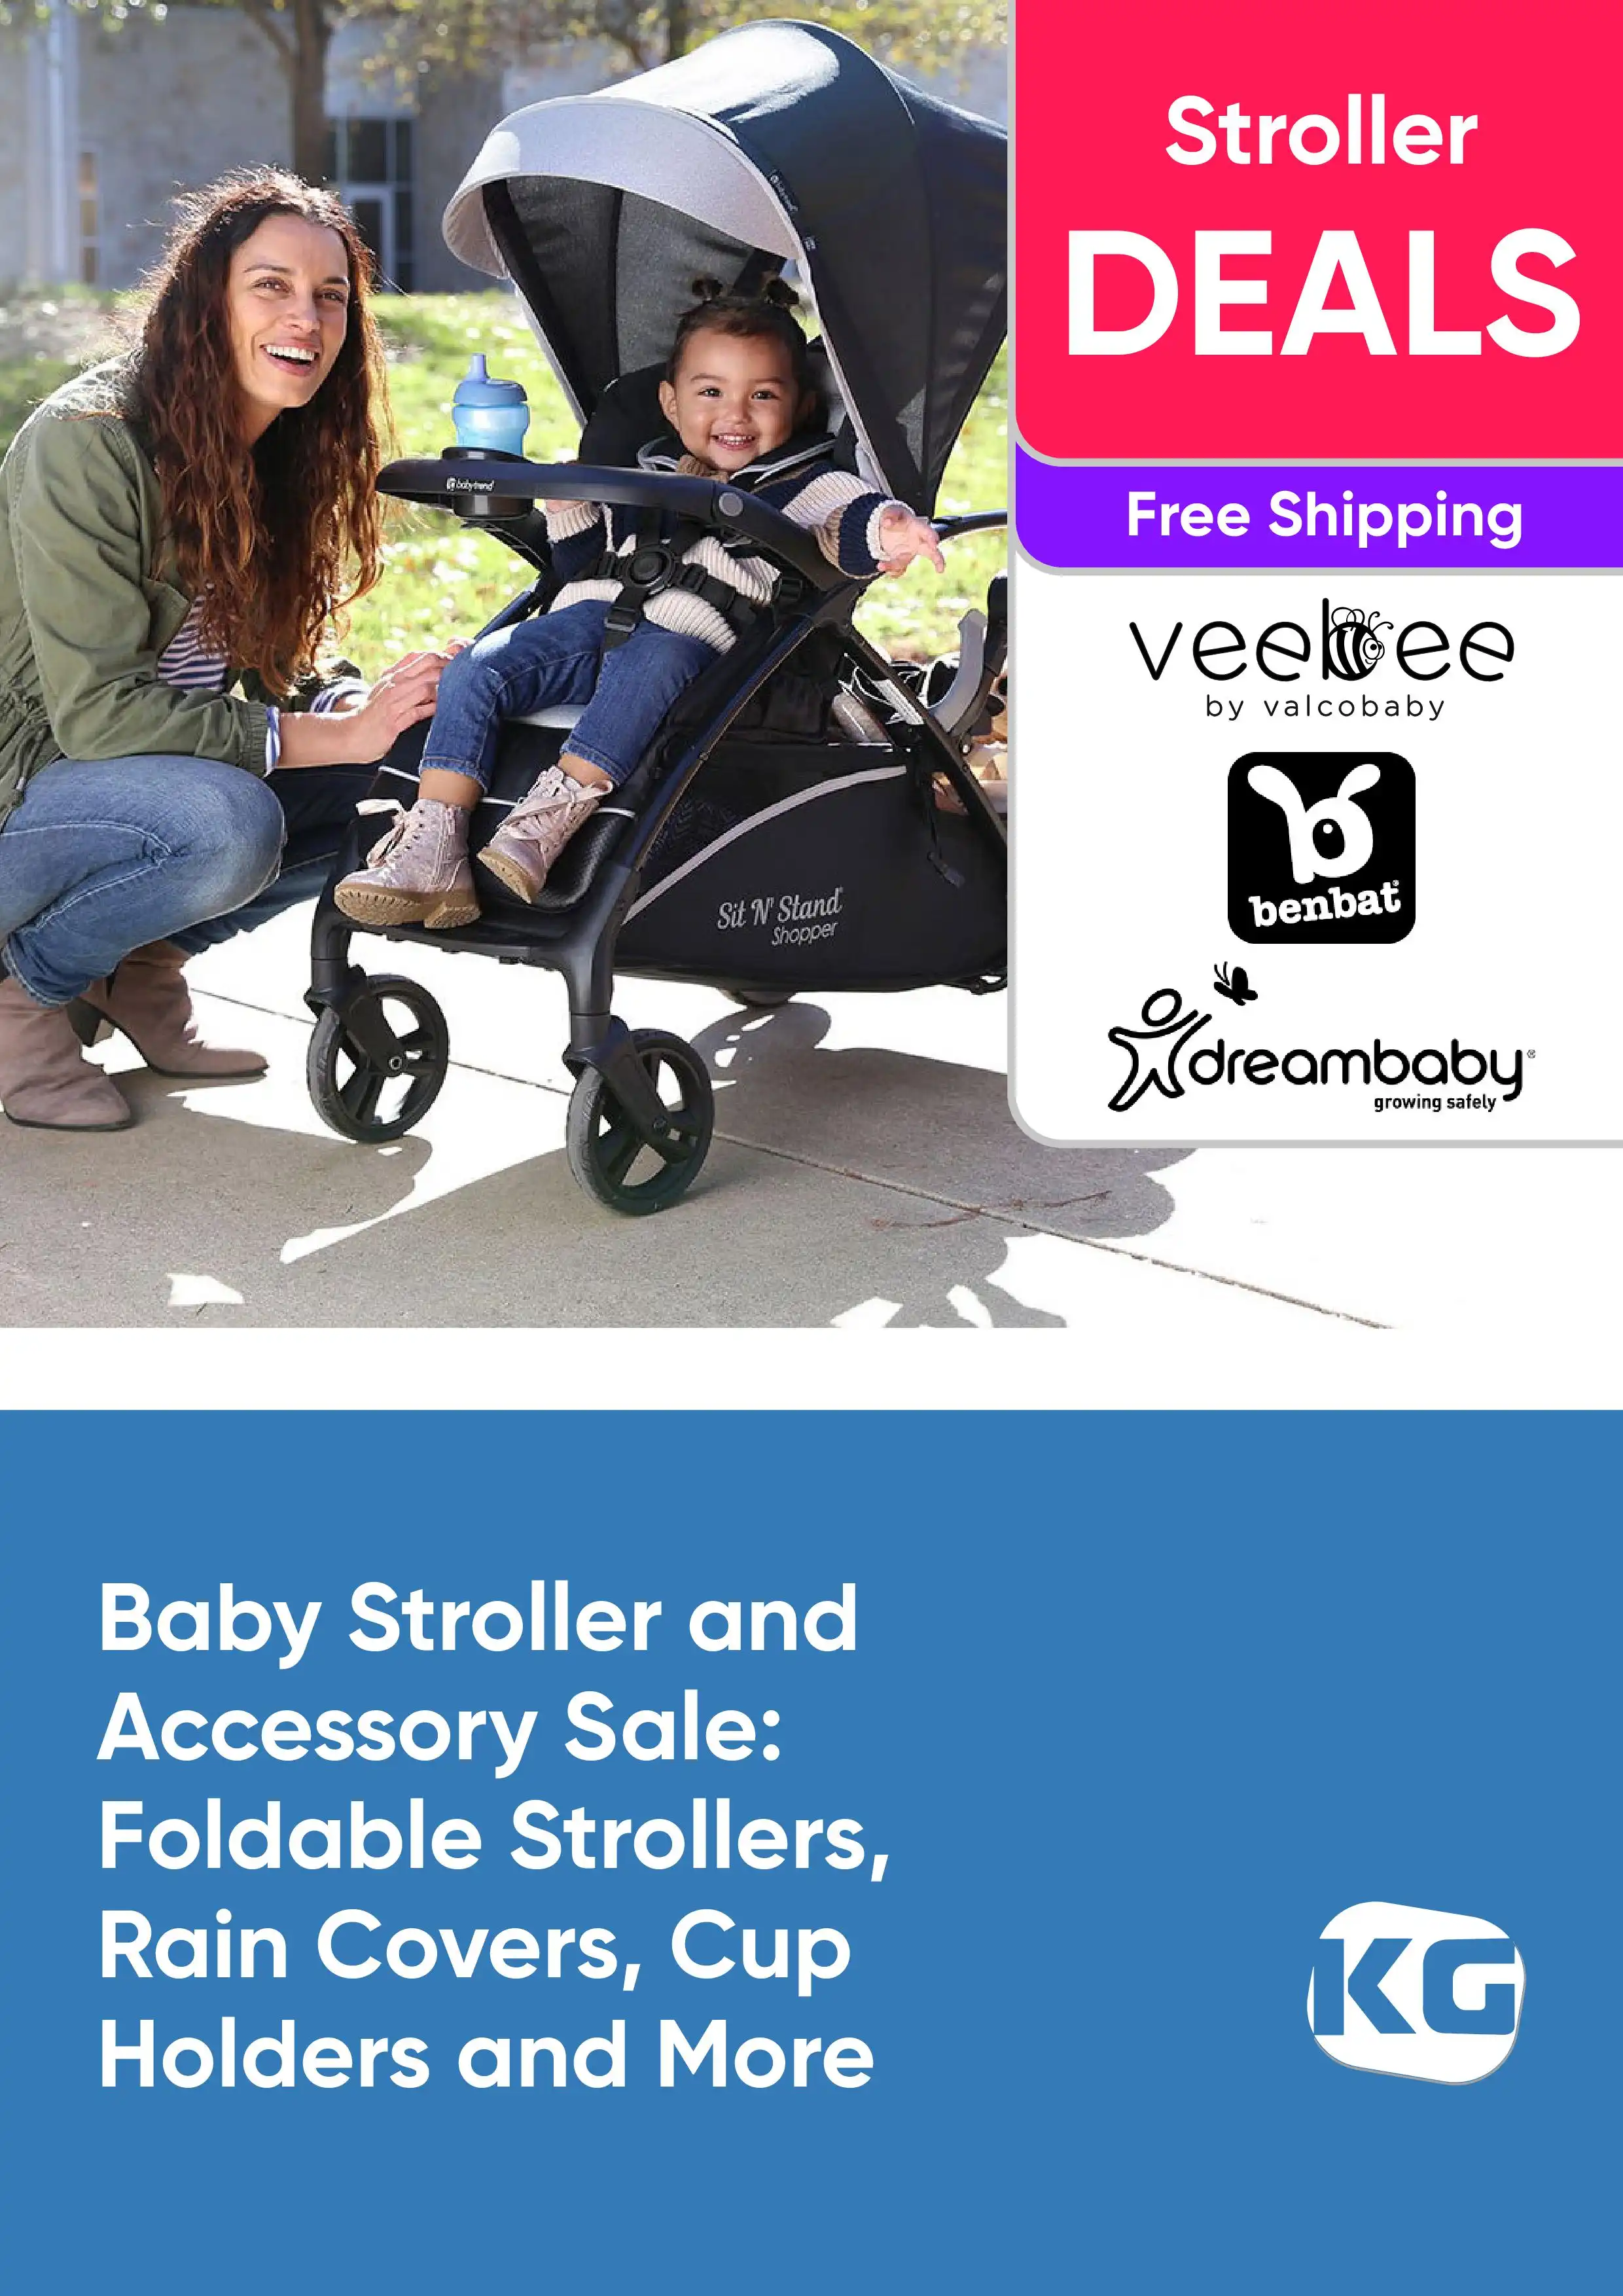 Baby Stroller and Accessory Sale - Foldable Strollers, Rain Covers, Cup Holders and More - Veebee, Benbat, dreambaby